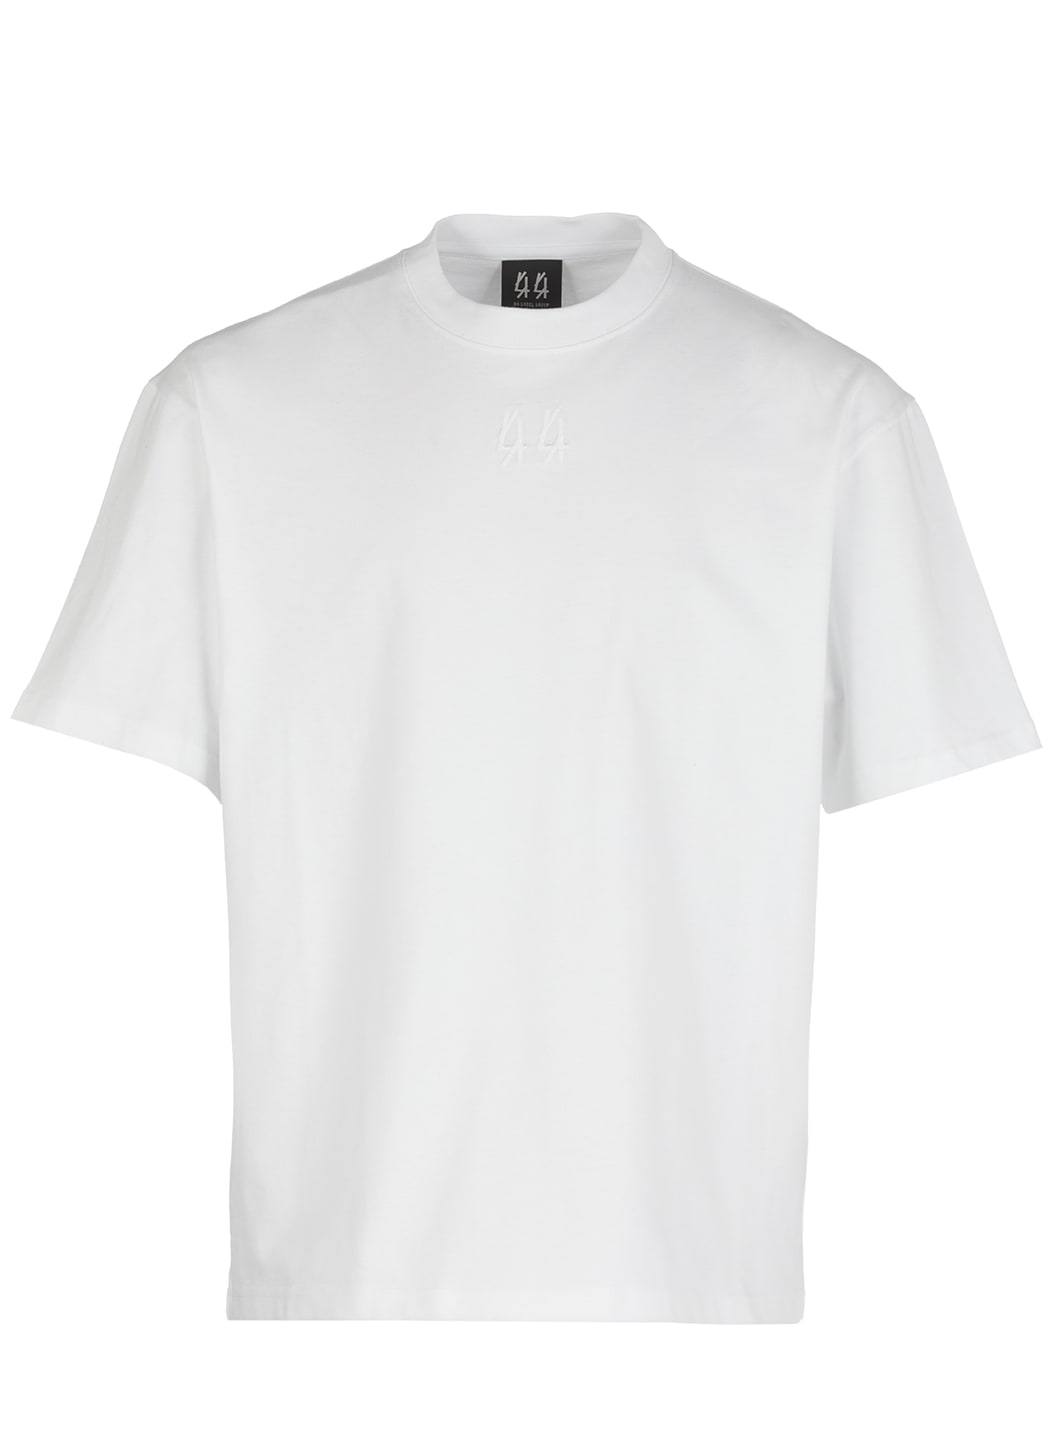 44 Label Group Inverted Sand T-shirt